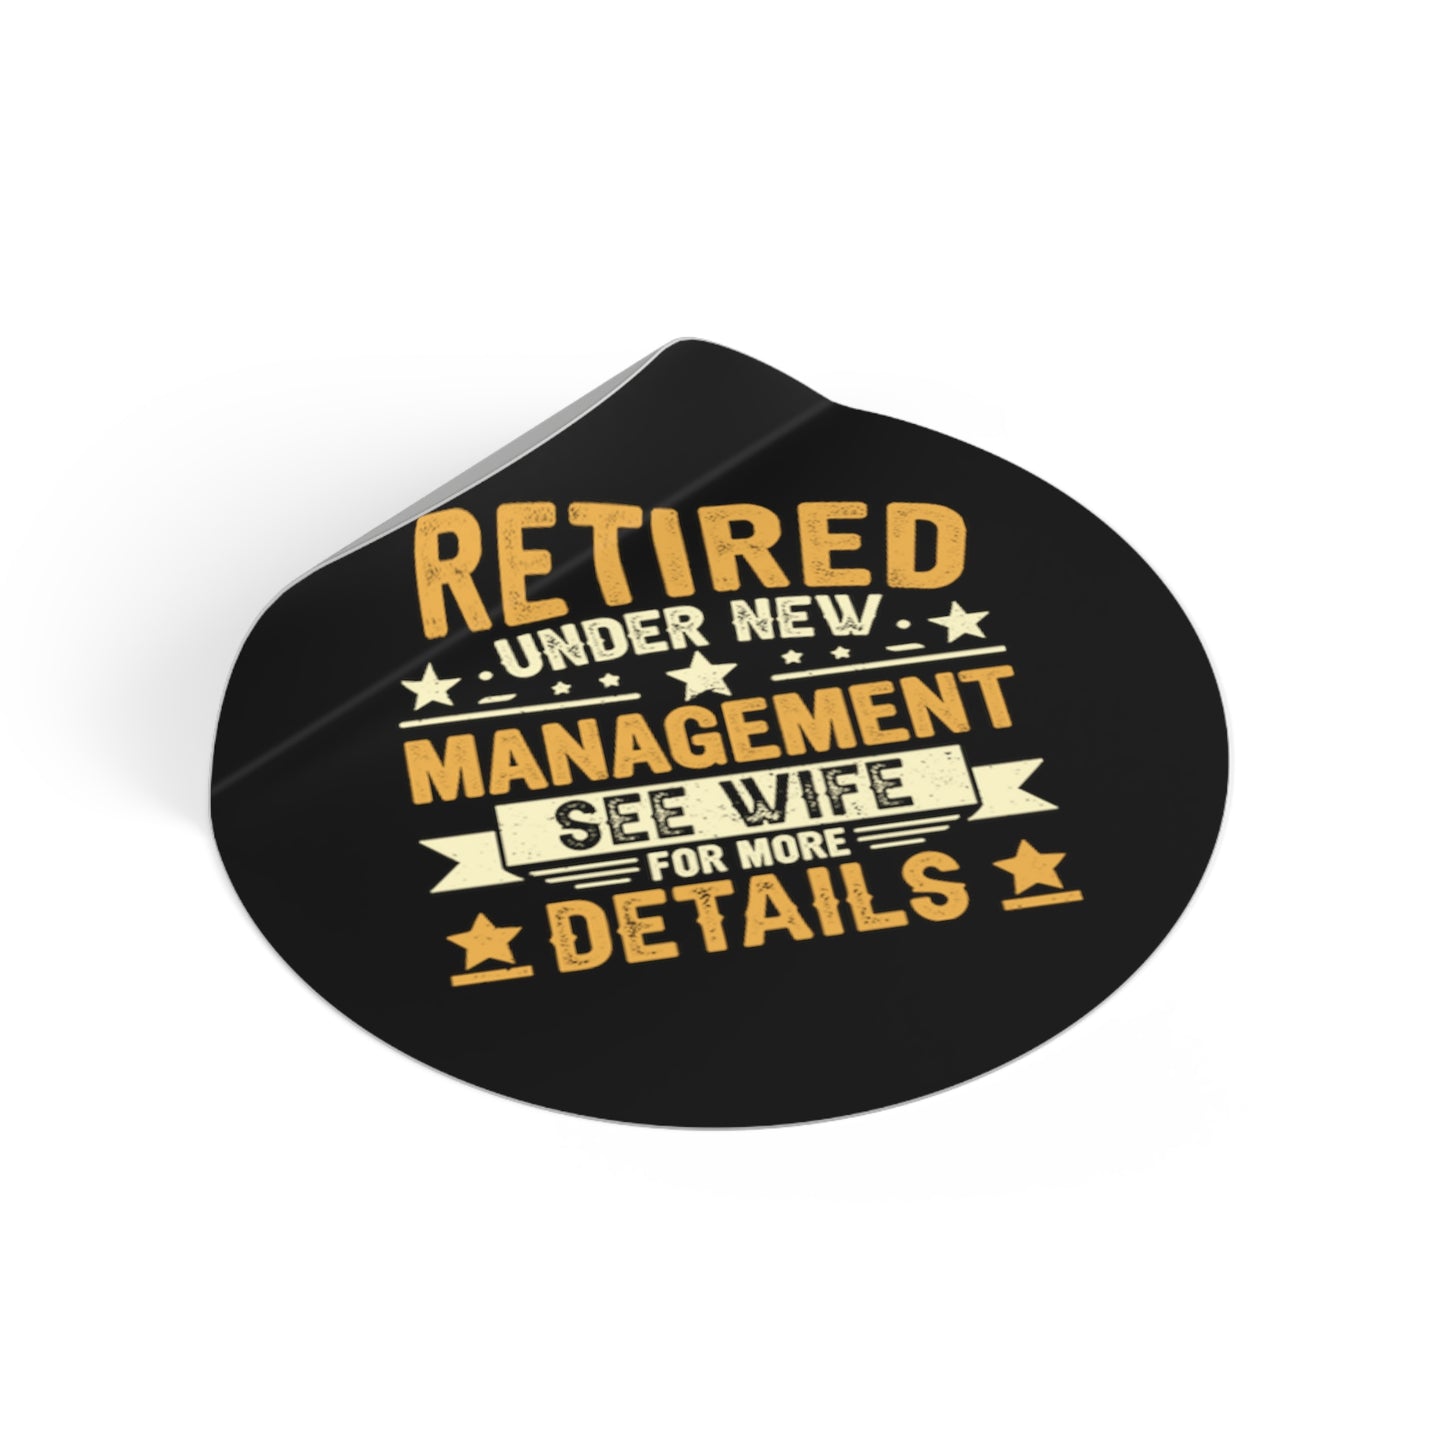 Retired Under New Management See Wife For More Details Sticker